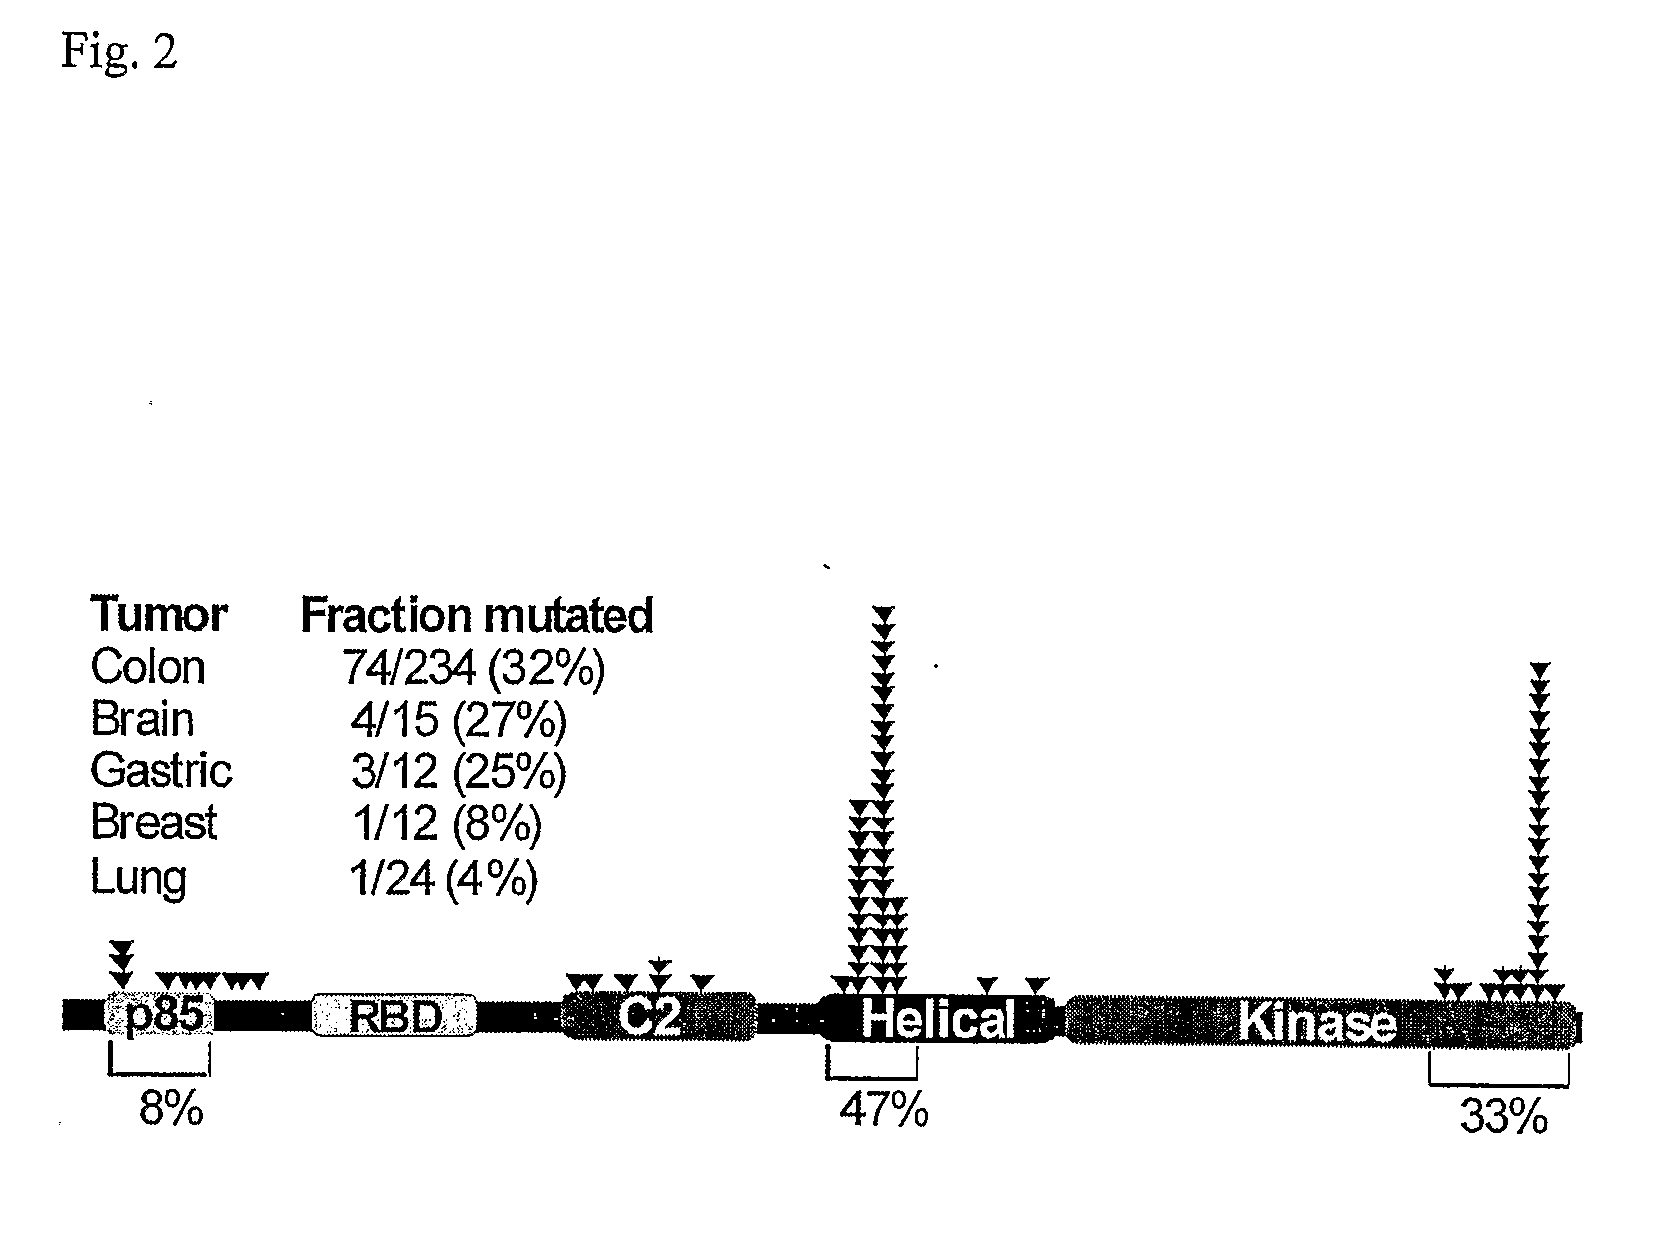 Mutations of the pik3ca gene in human cancers